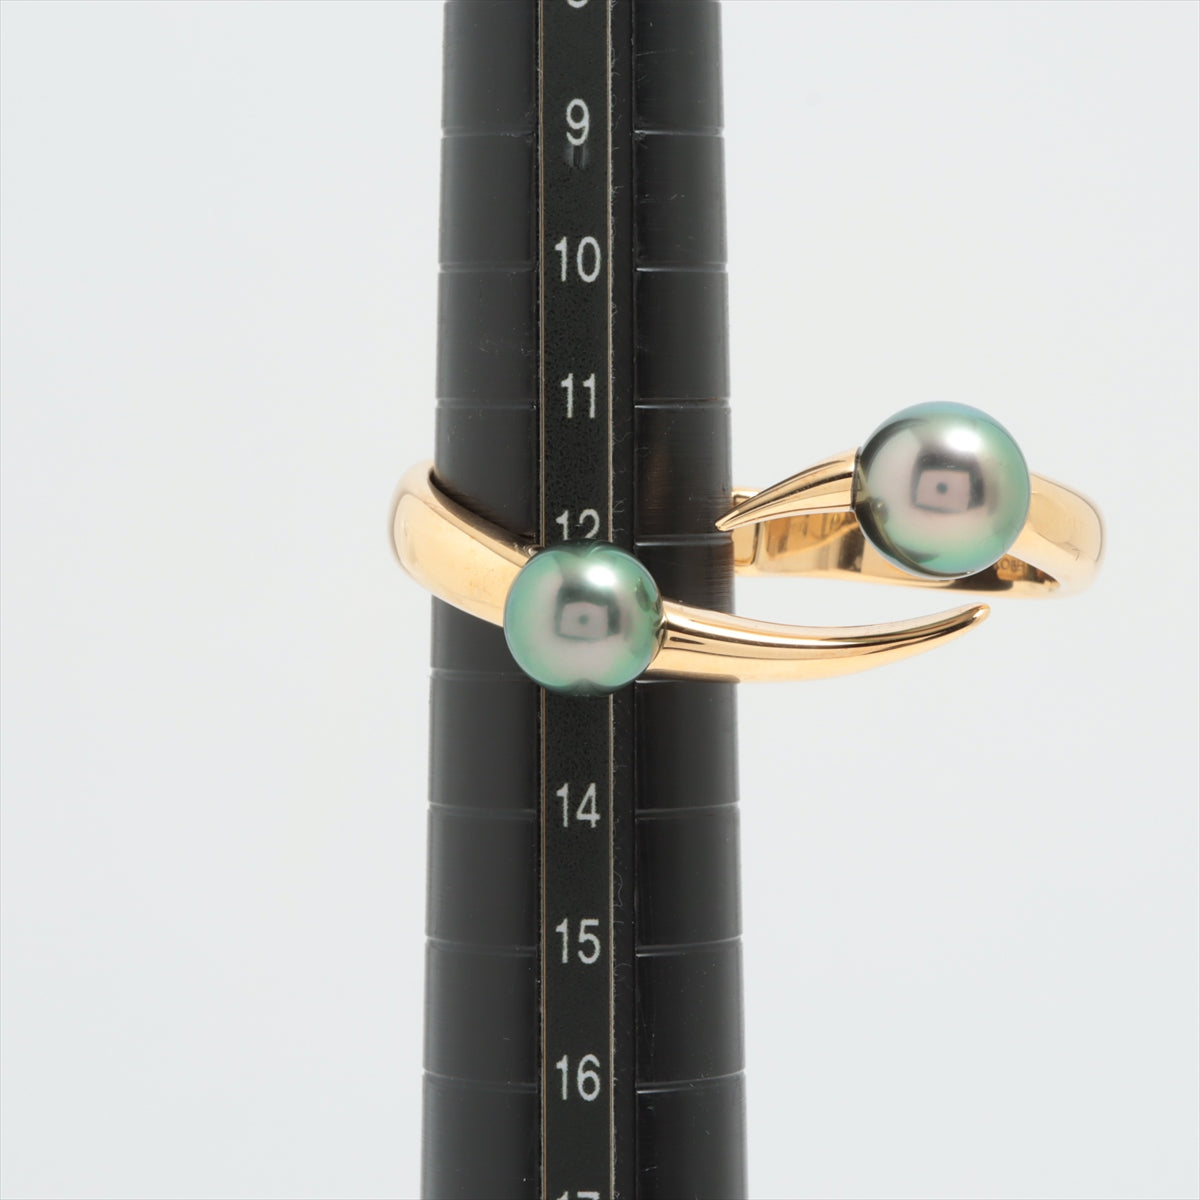 TASAKI Pearl Ring 750(YG) 16.3g Approx. 8.5mm to 9.5mm